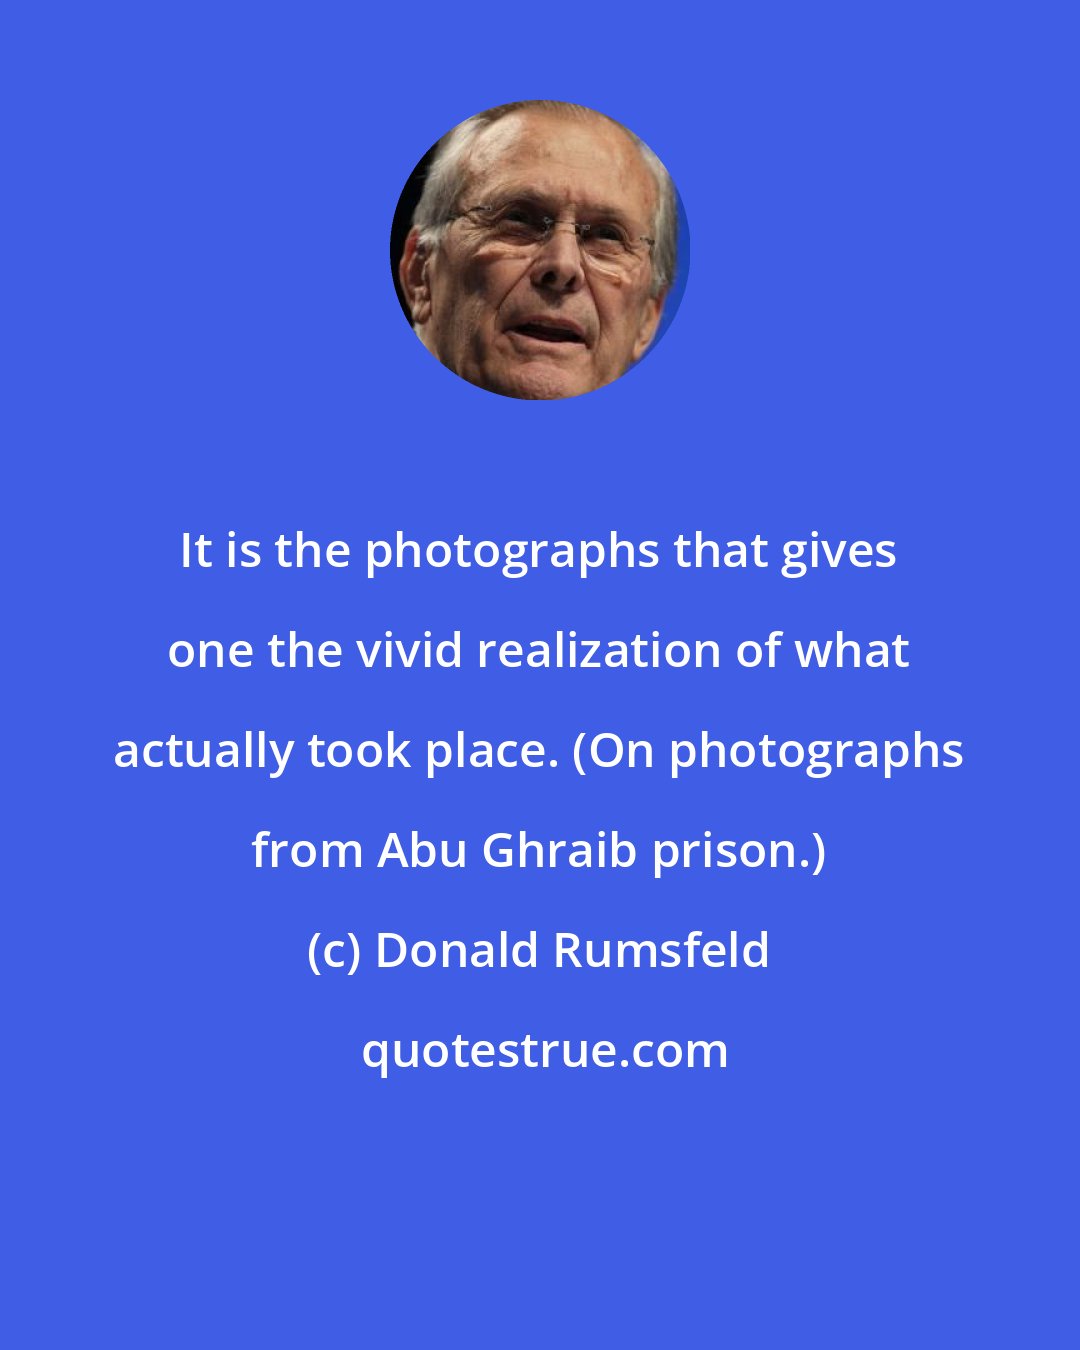 Donald Rumsfeld: It is the photographs that gives one the vivid realization of what actually took place. (On photographs from Abu Ghraib prison.)